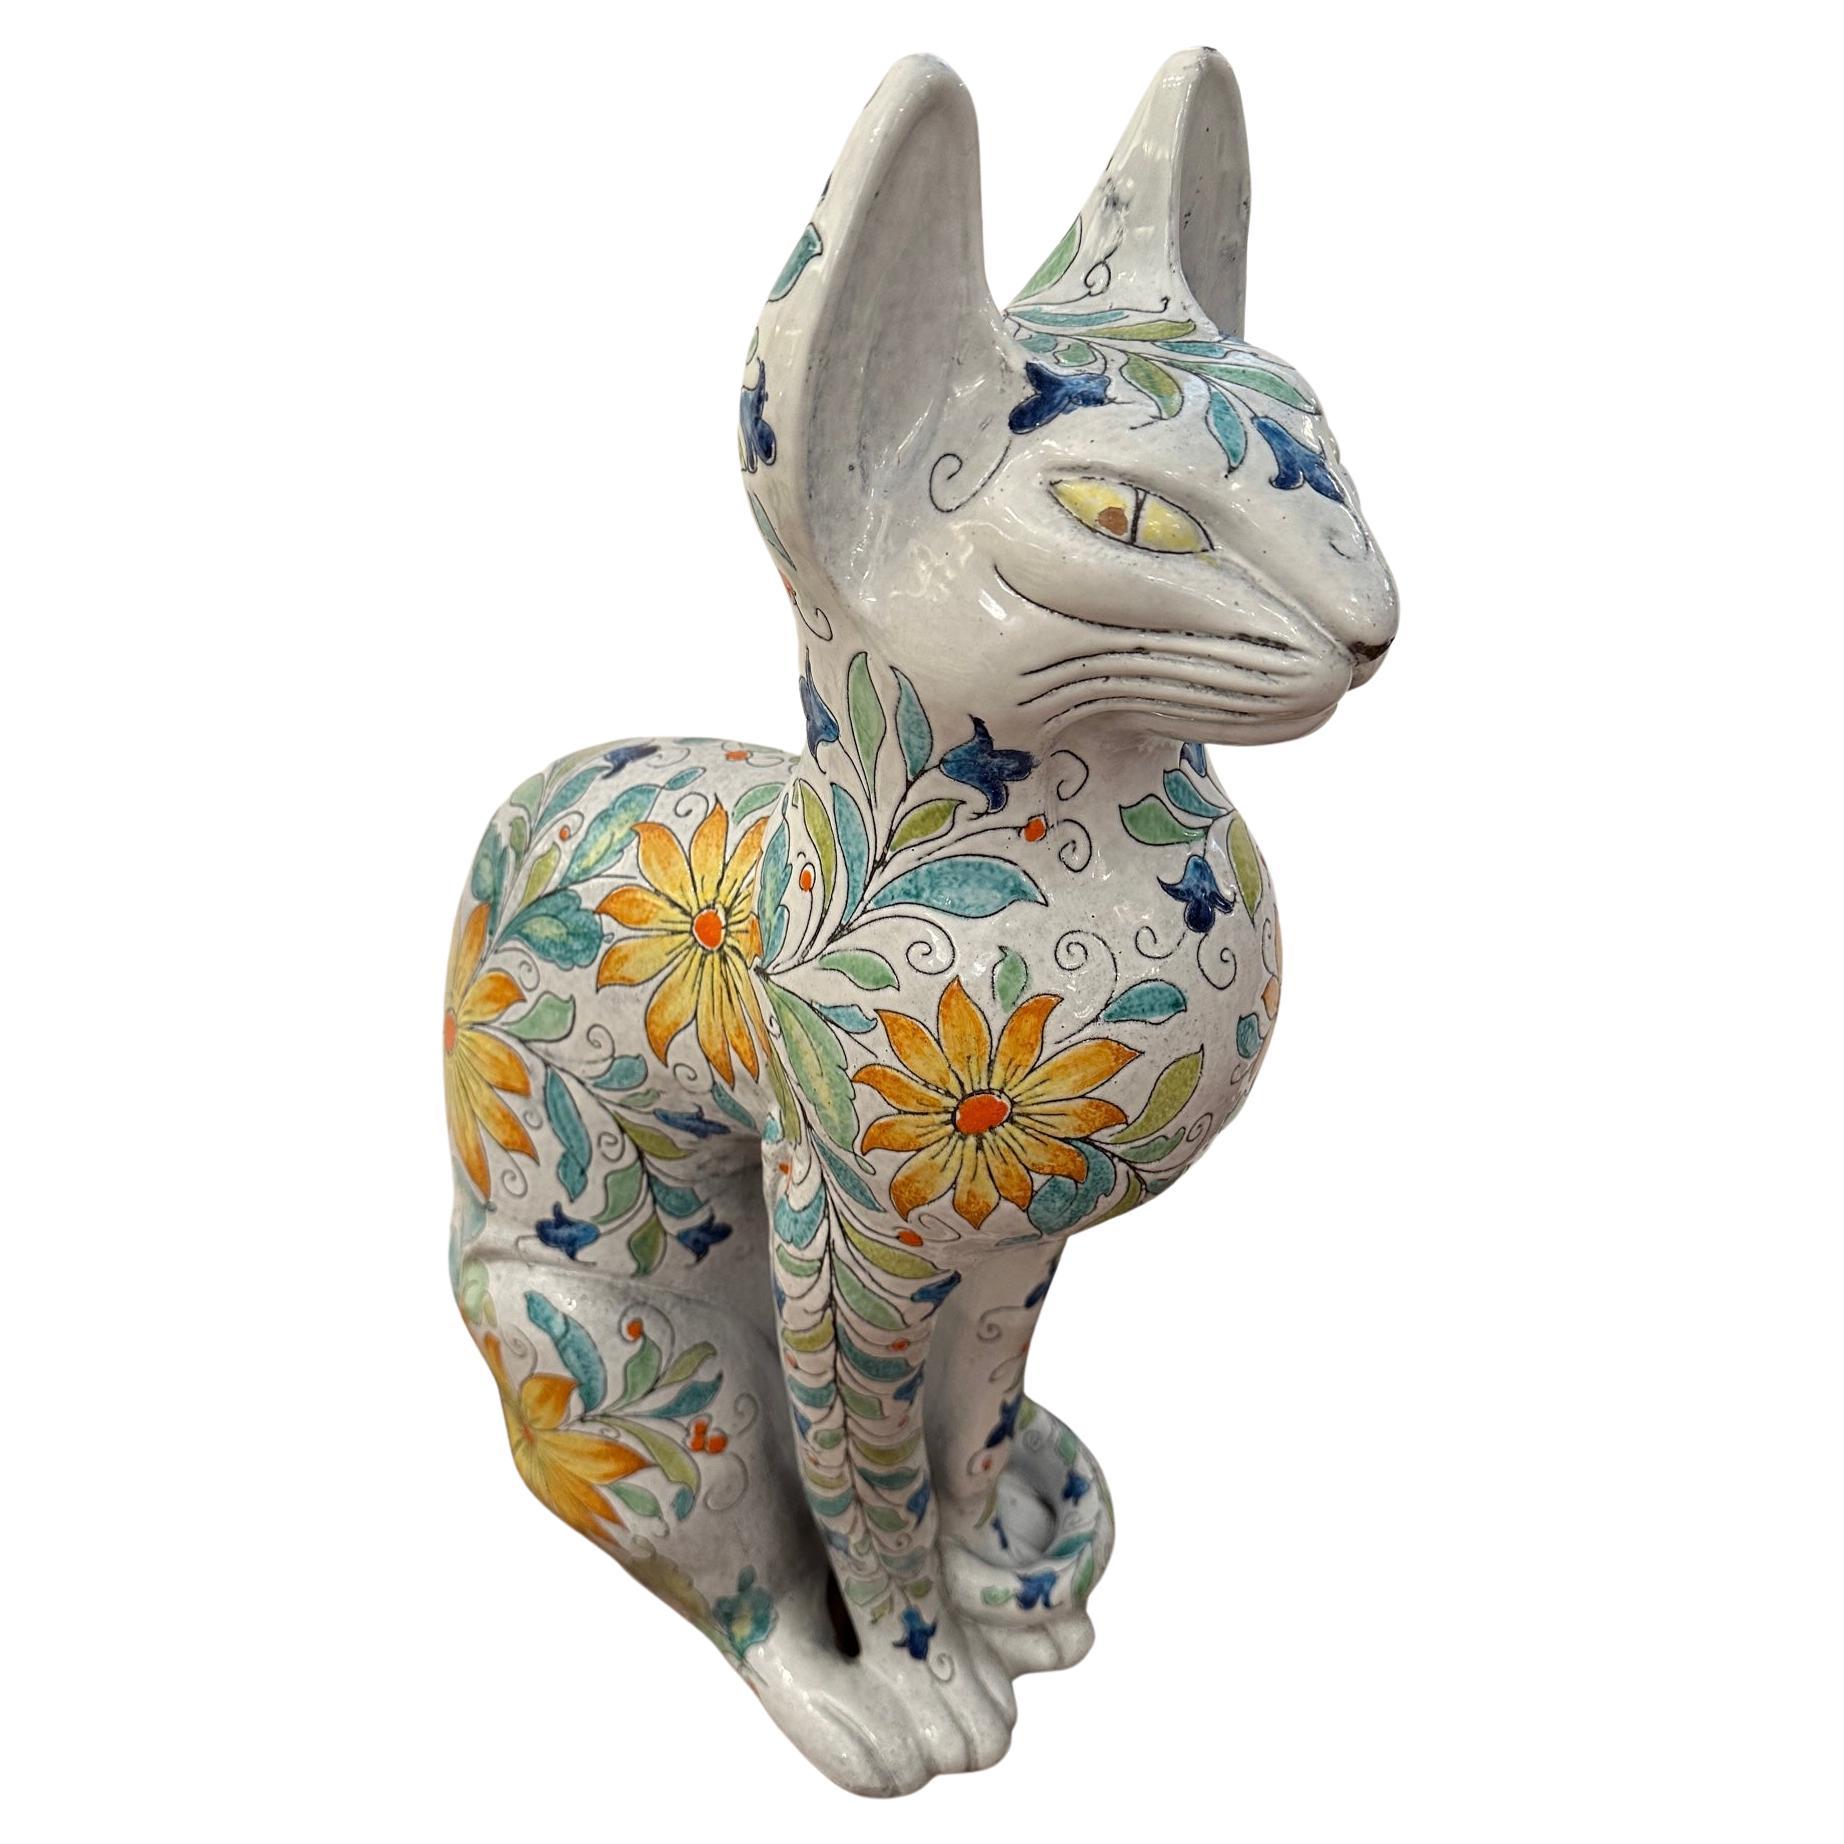 Egyptian Inspired Sgraffito Glazed Terracotta Cat with Floral Decoration